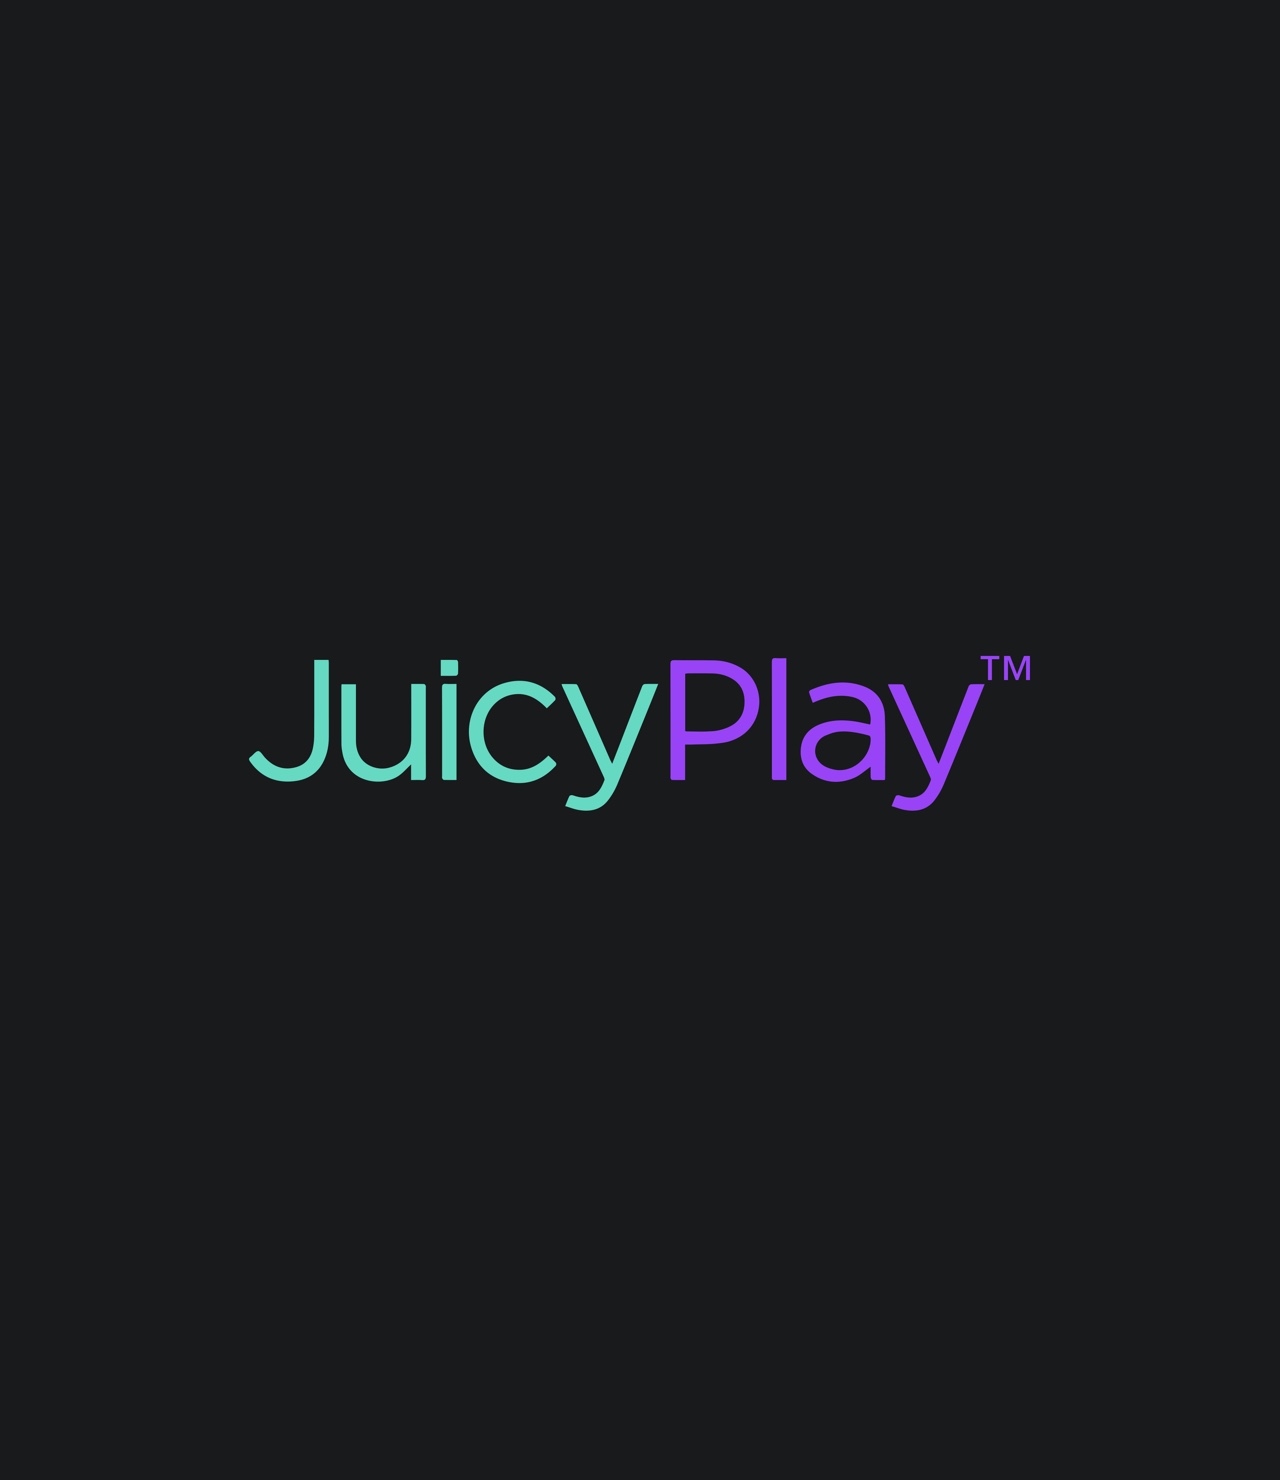 Logotype design for Juicy Play